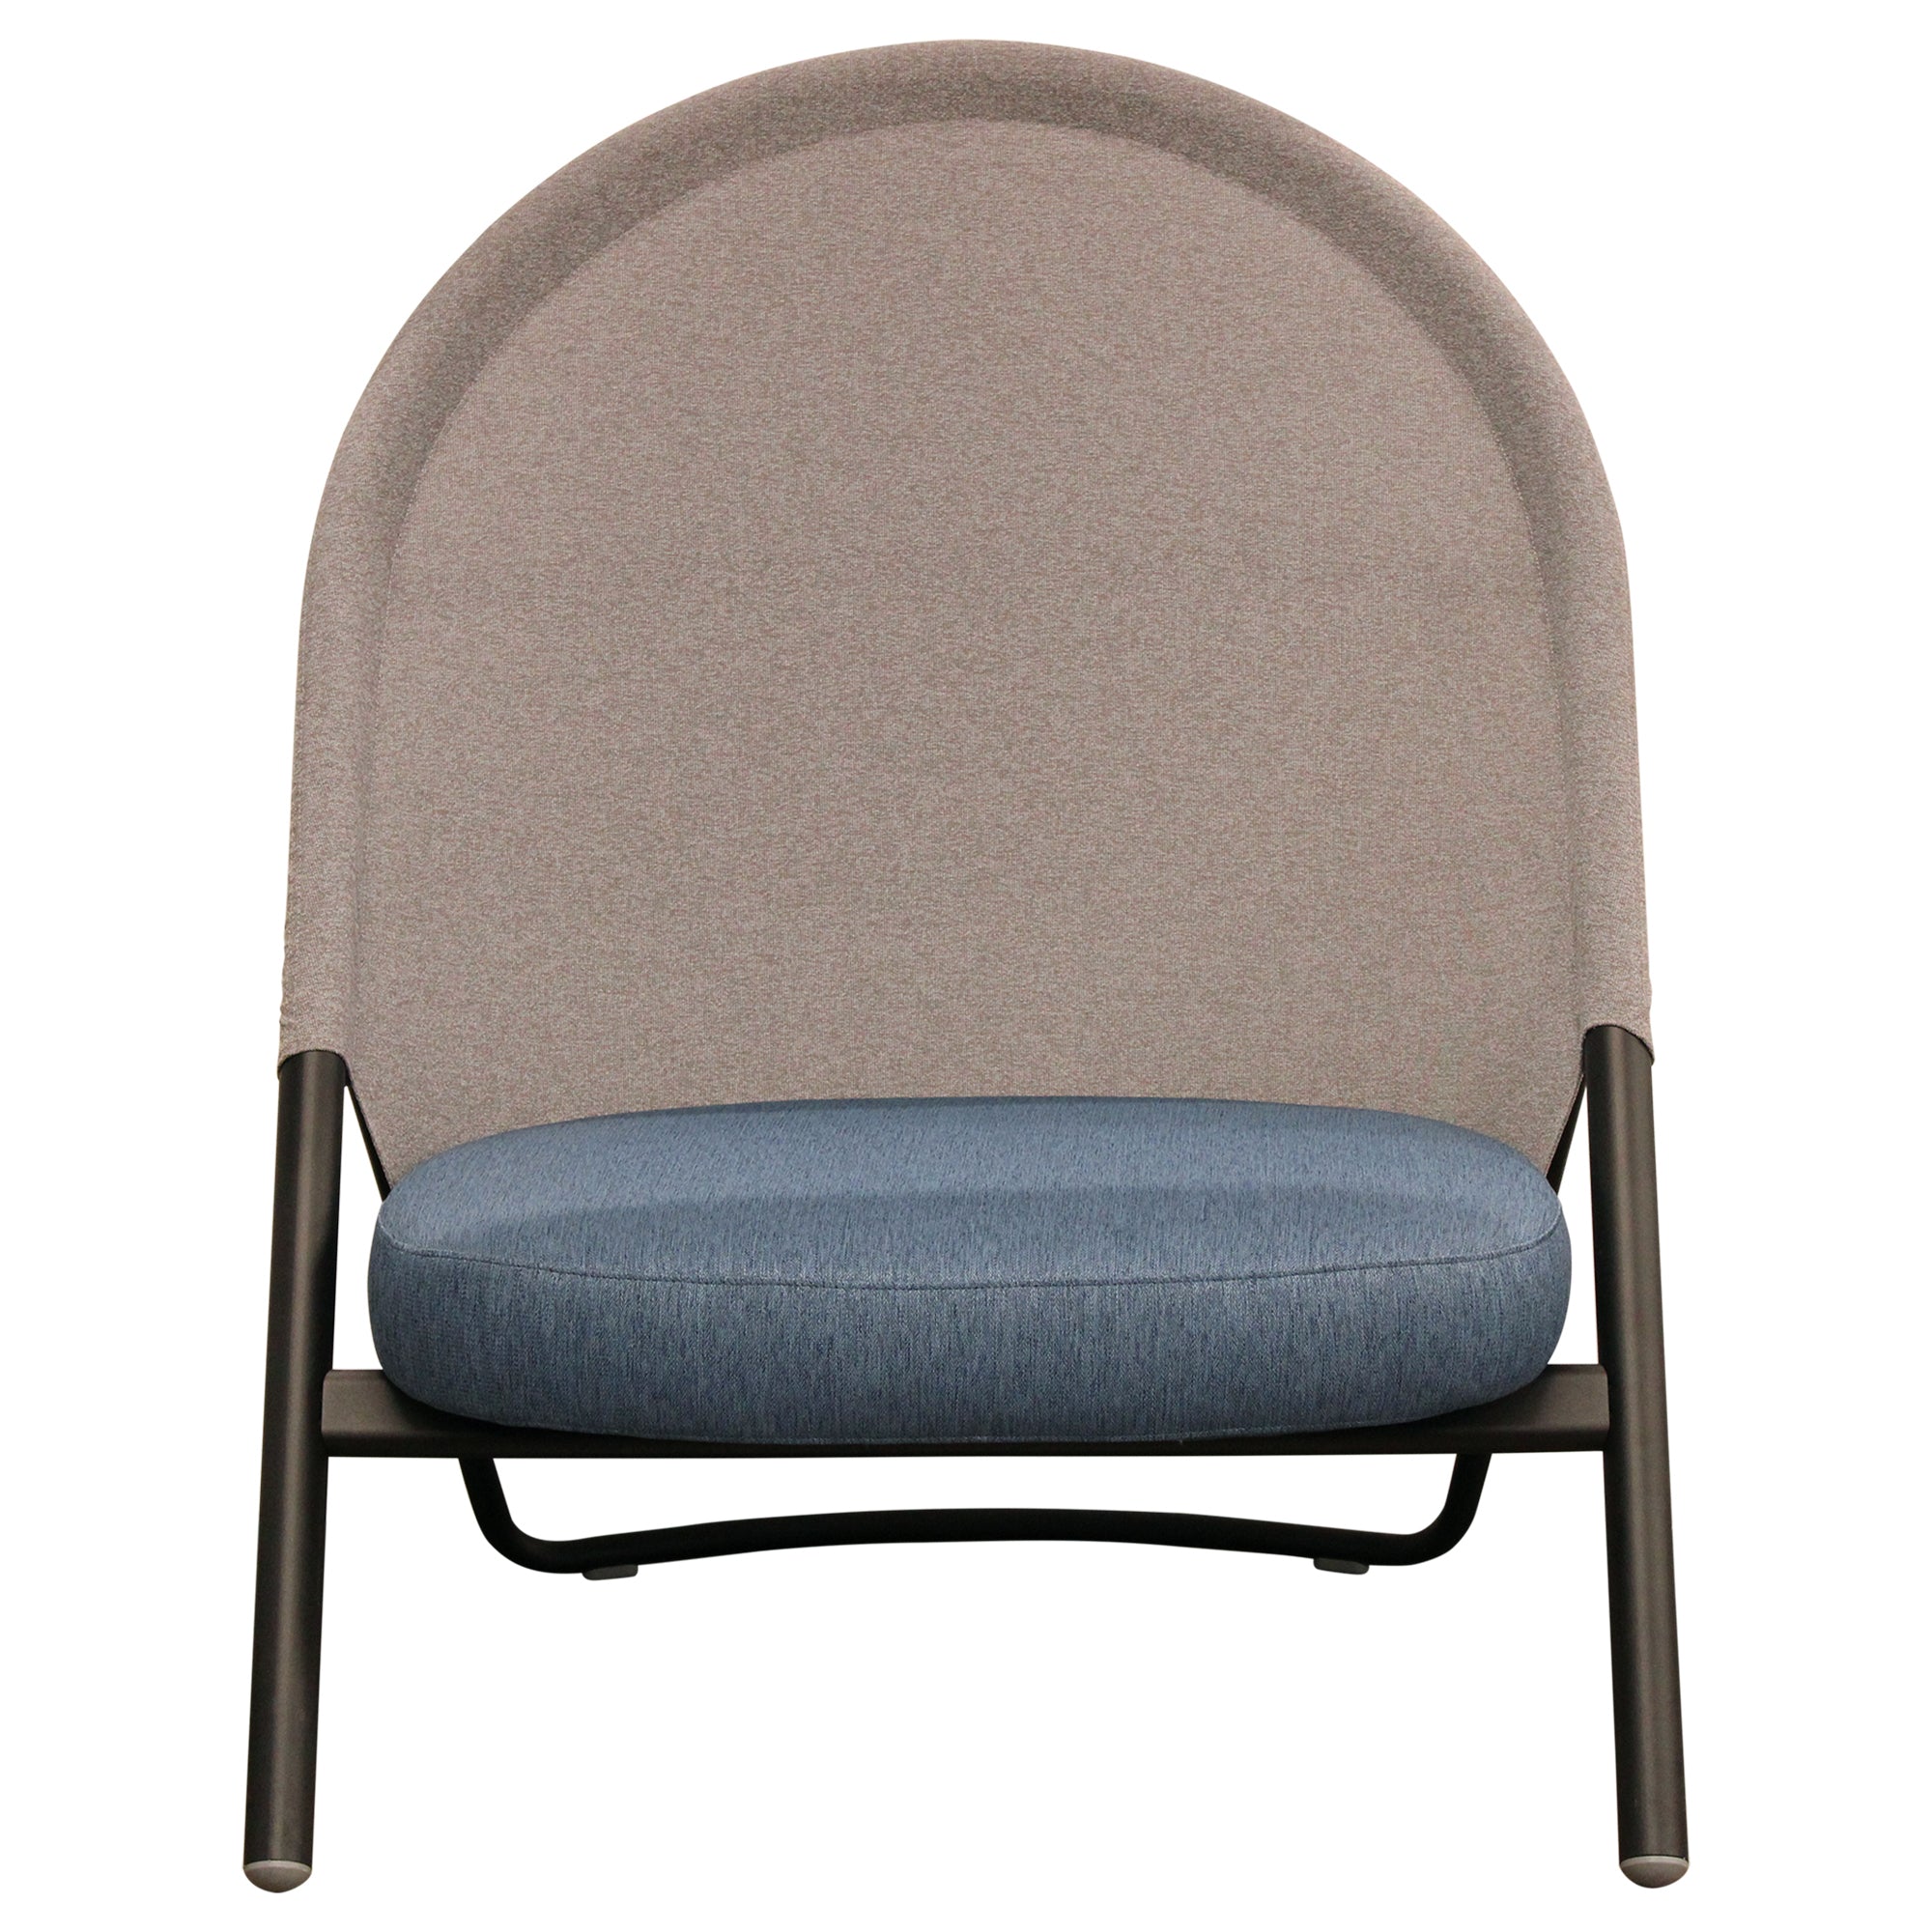 Teknion Routes Arc Lounge Chair, Blue - Preowned